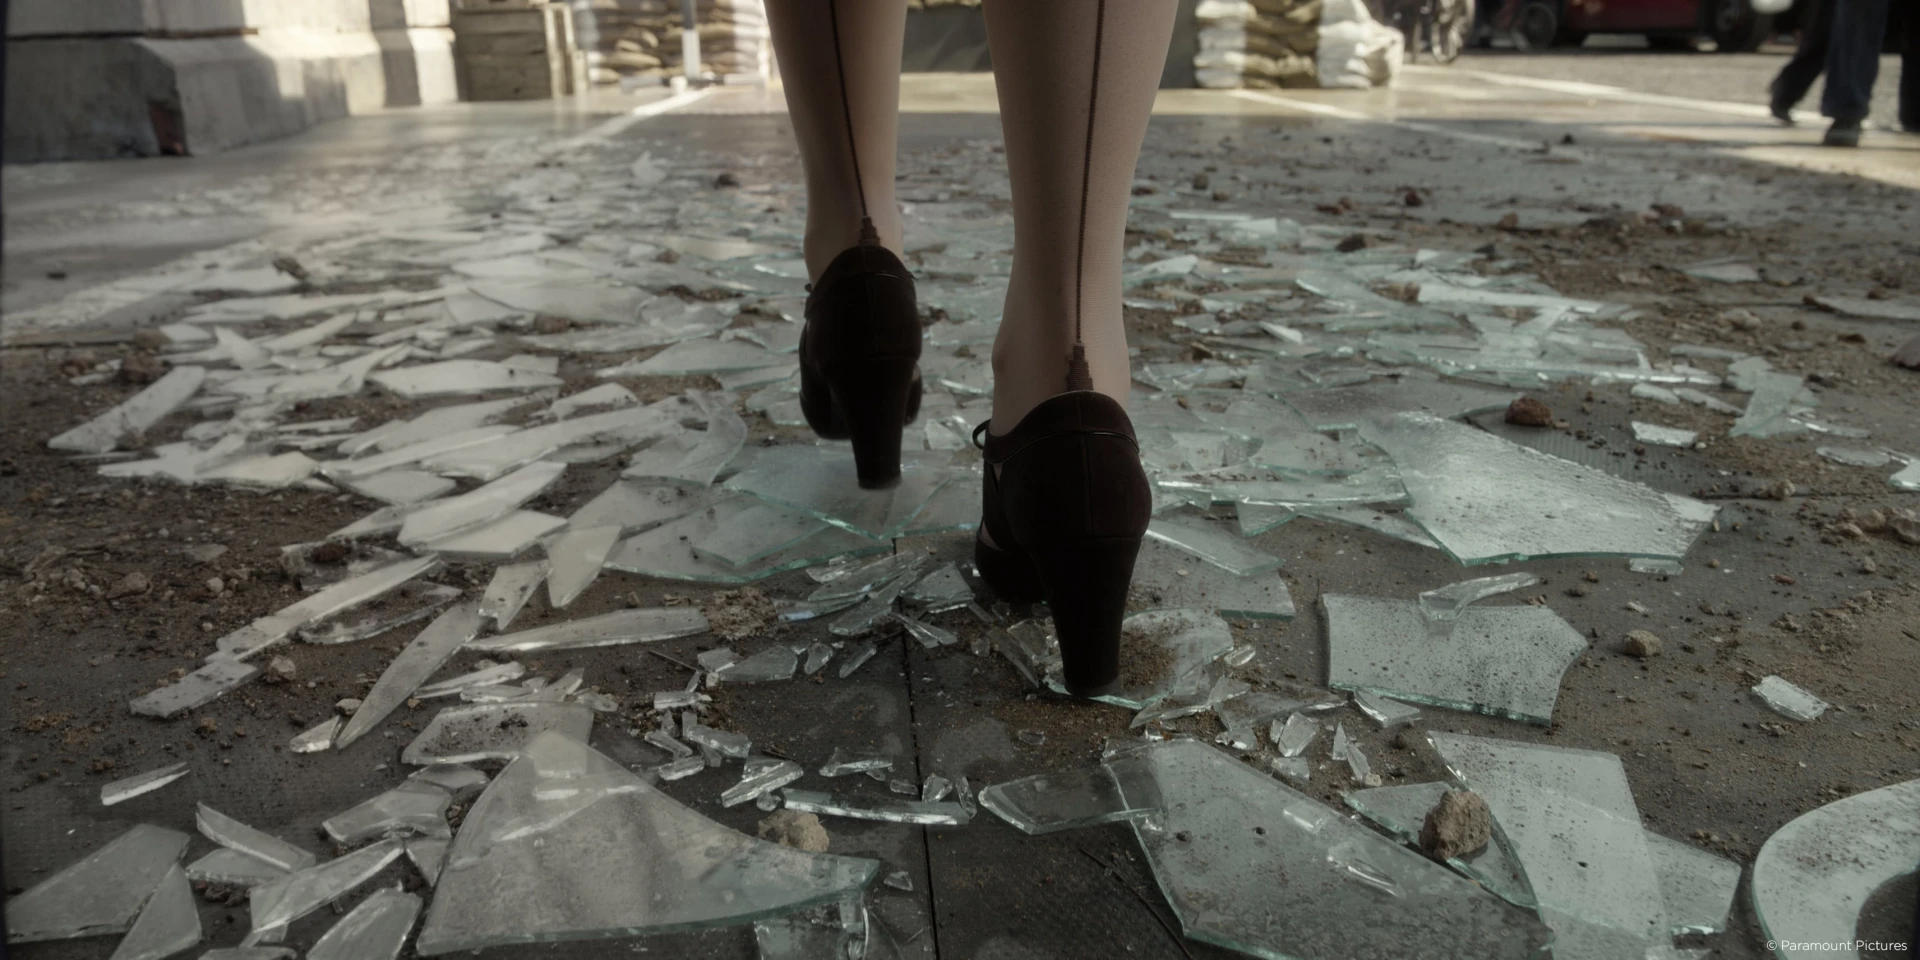 Woman with heels walking on broken glass in Allied Raynault vfx